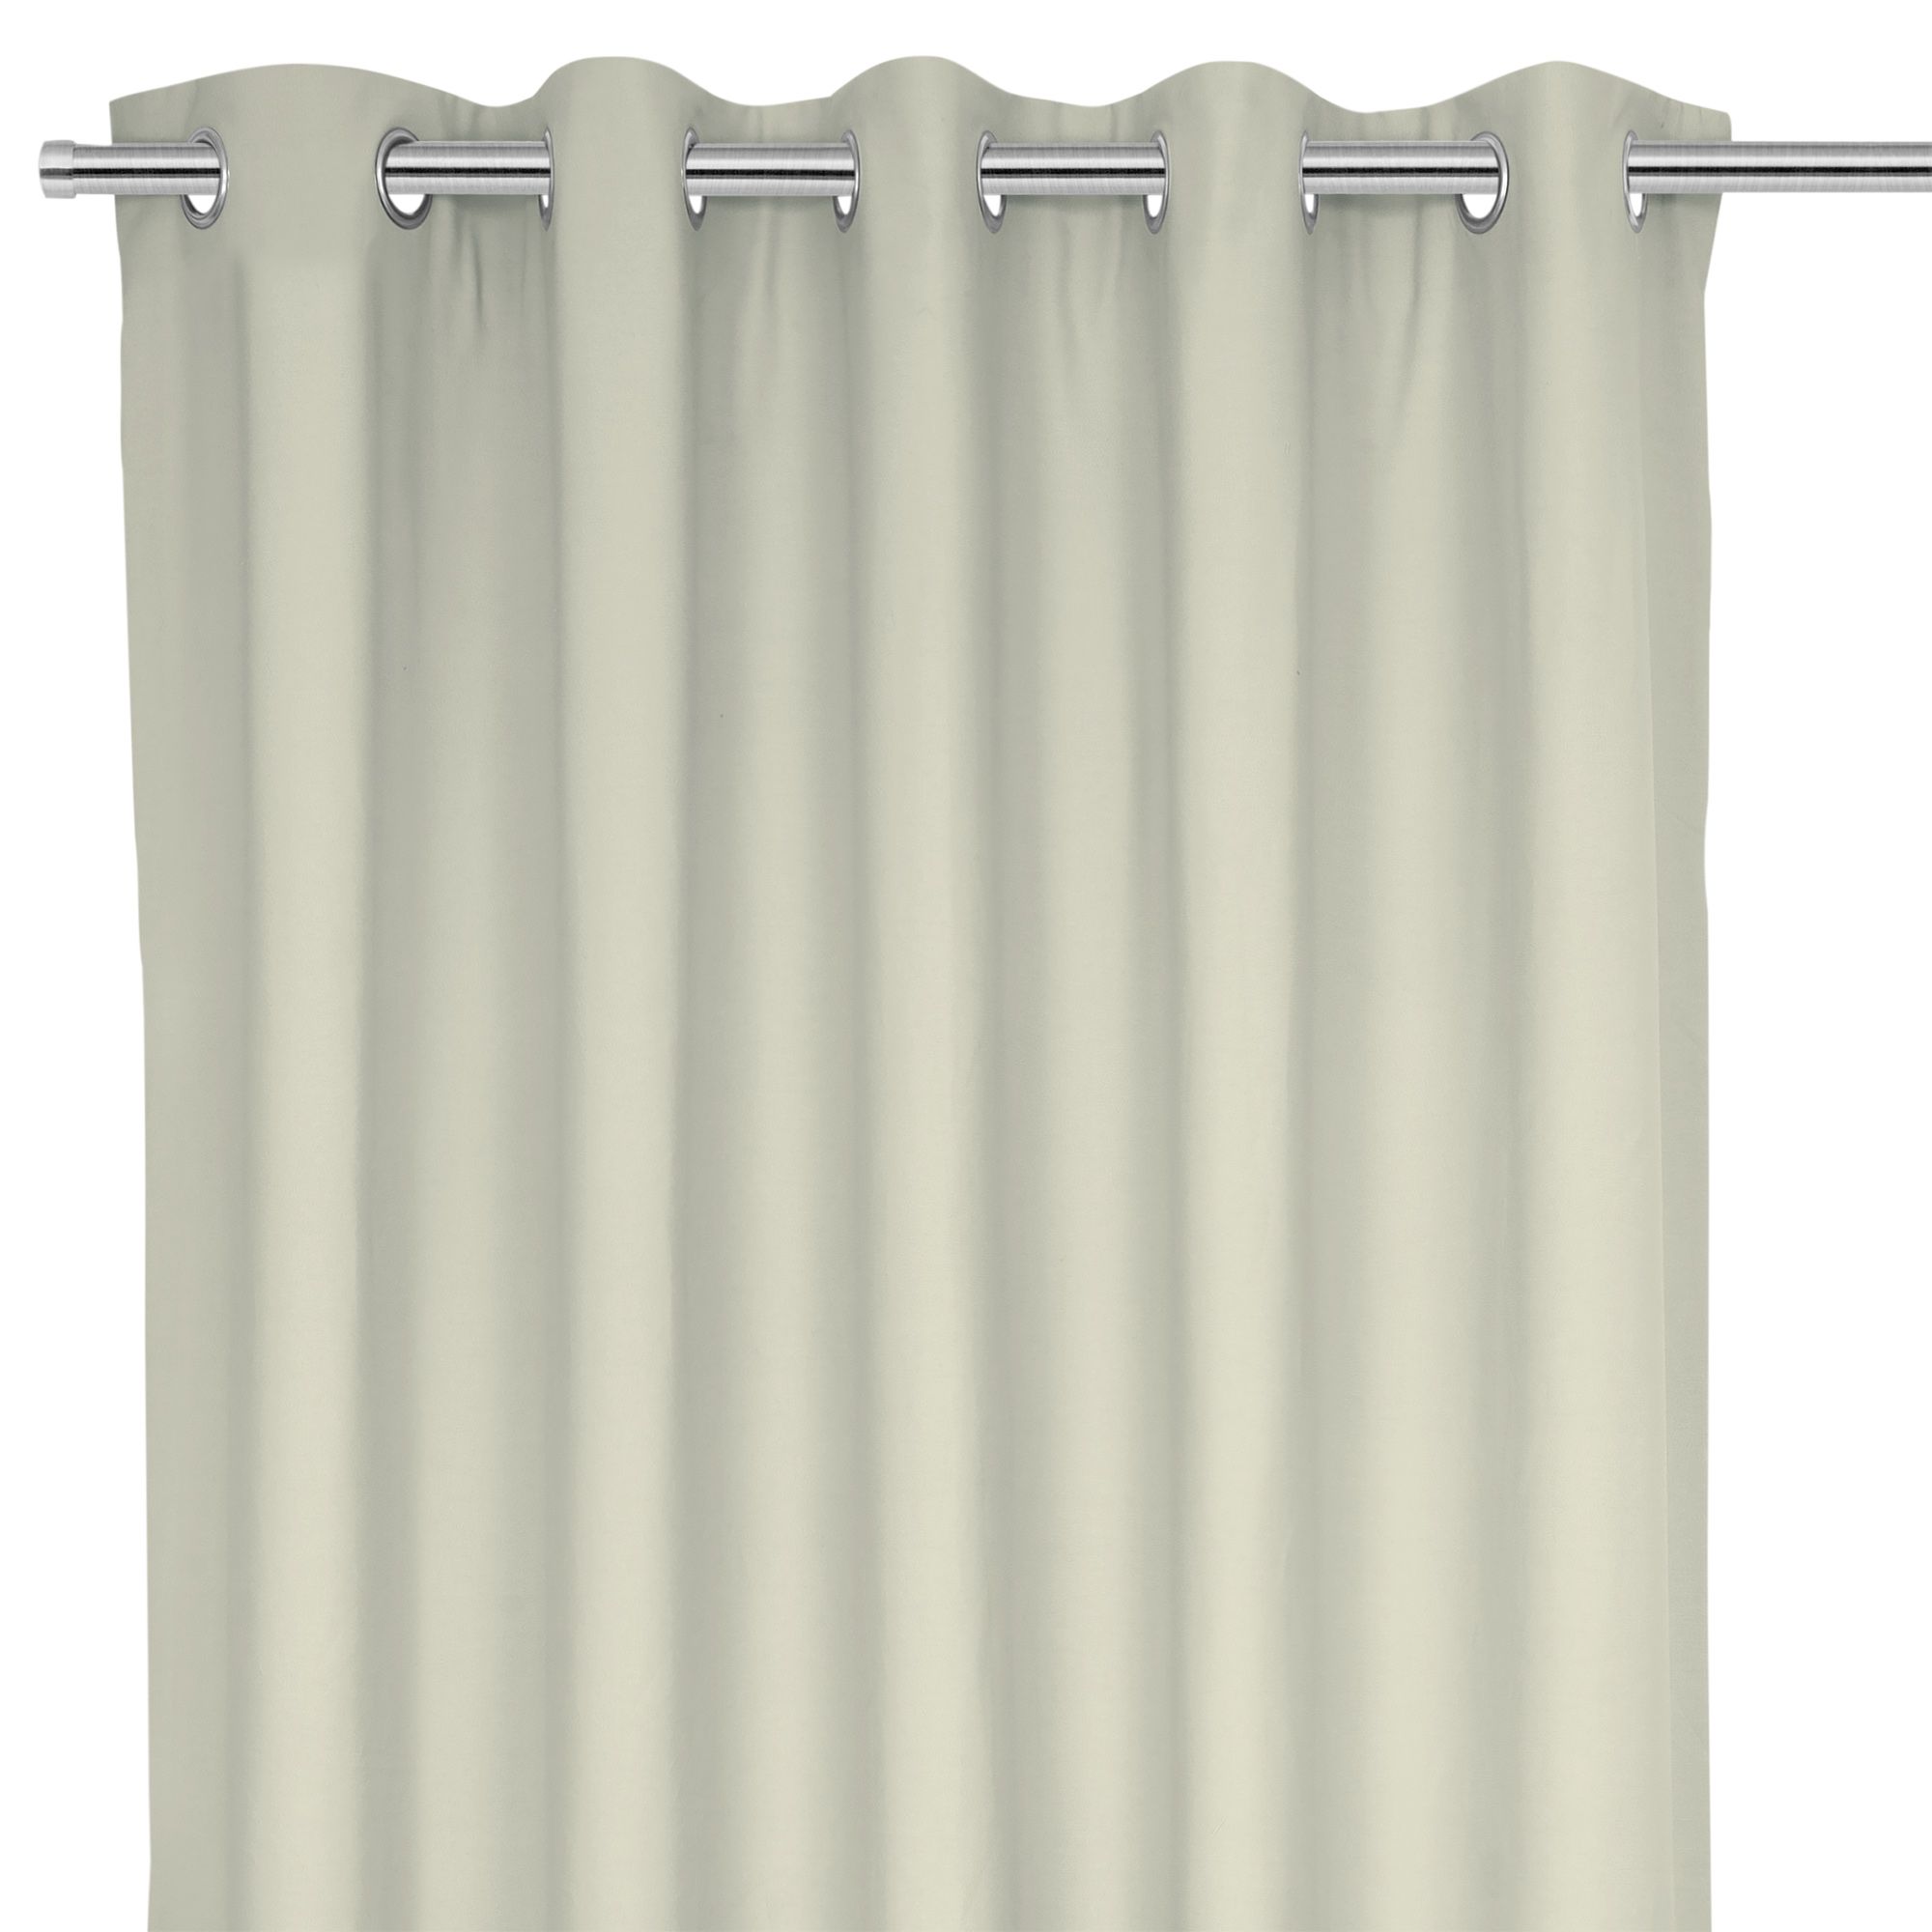 Hiva Beige Solid dyed Lined Eyelet Curtain (W)167cm (L)228cm, Pair